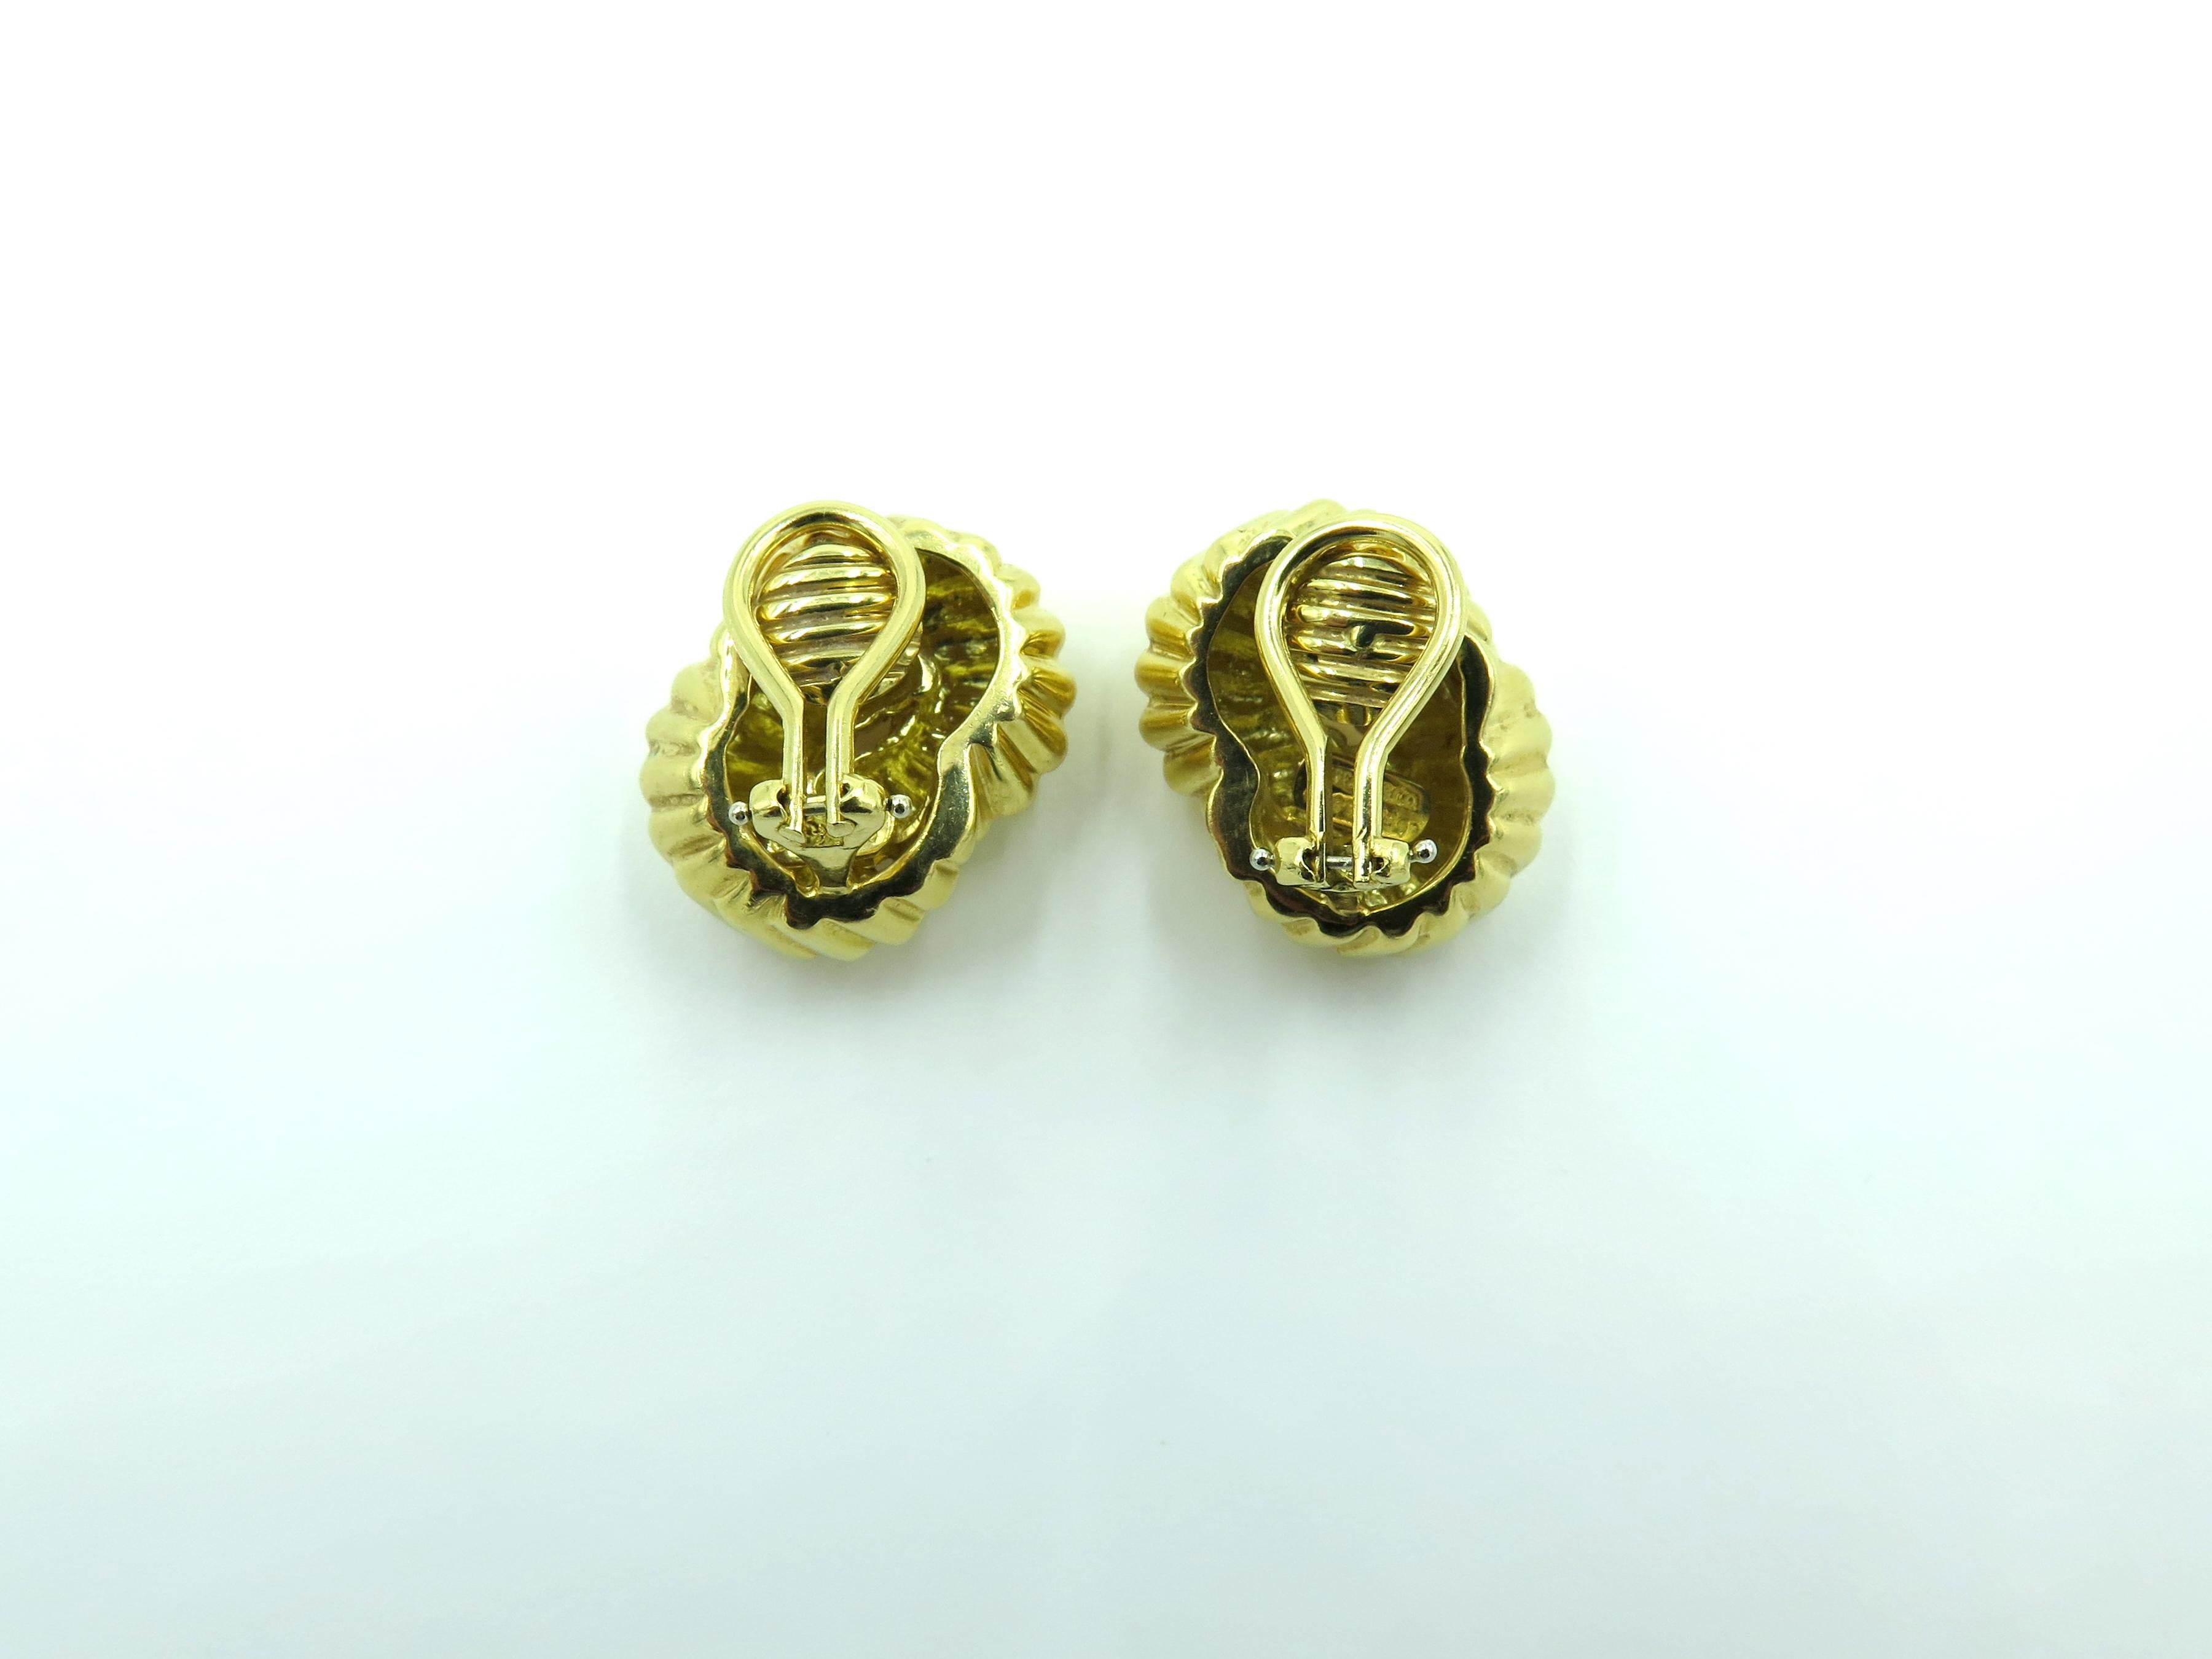 A pair of 18 karat yellow gold earrings. Tiffany & Co. Designed as a fluted knot. Length is approximately 3/4 inches, gross weight is approximately 20.3 grams. Stamped Tiffany & Co. 750, 1998.